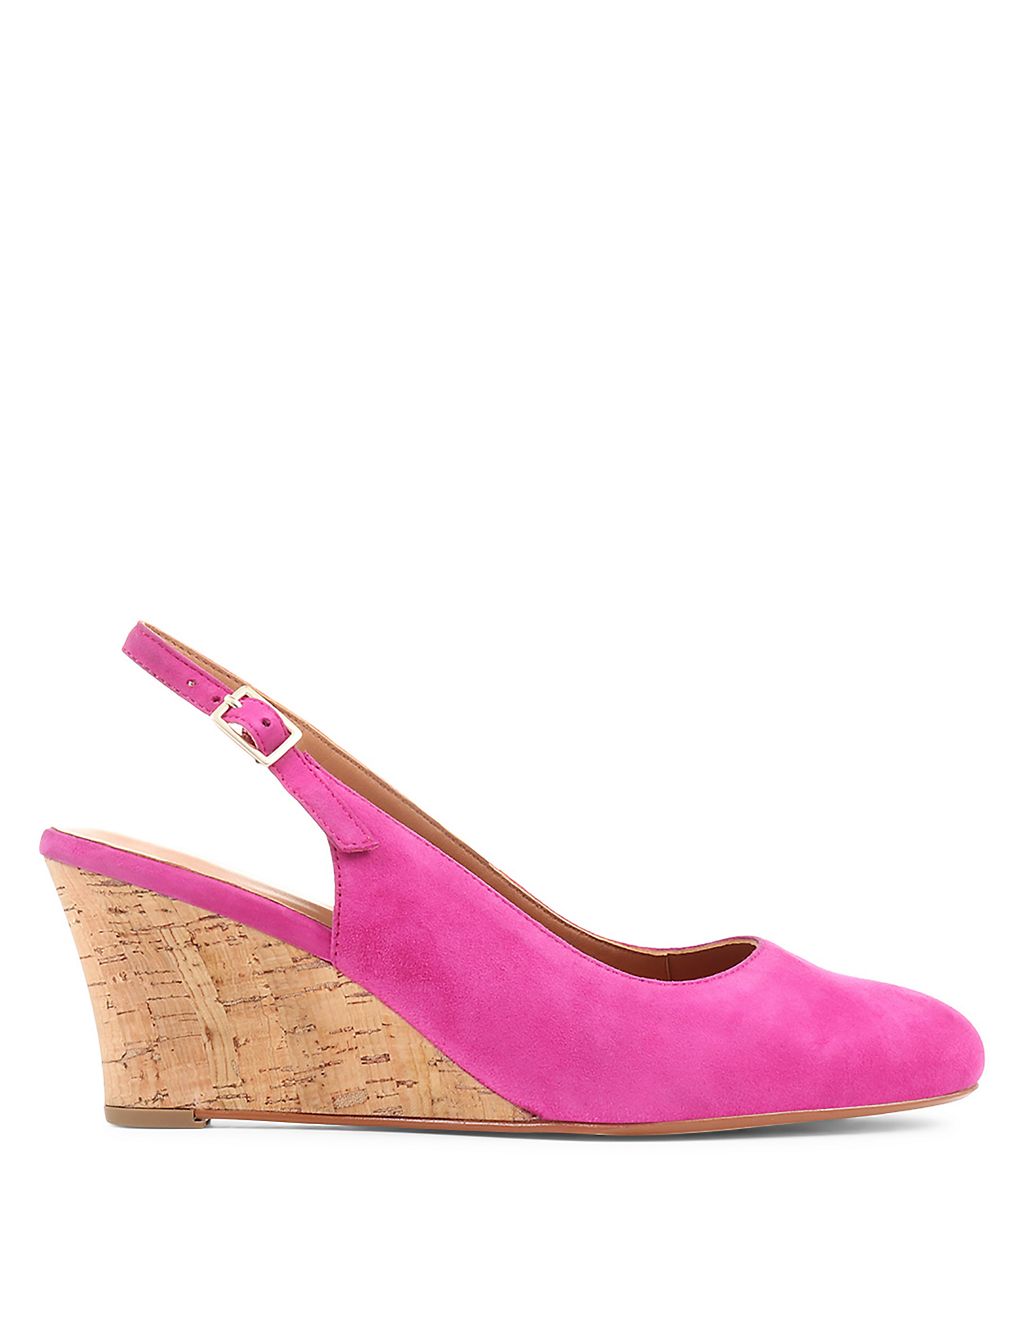 Suede Wedge Slingback Shoes 4 of 7